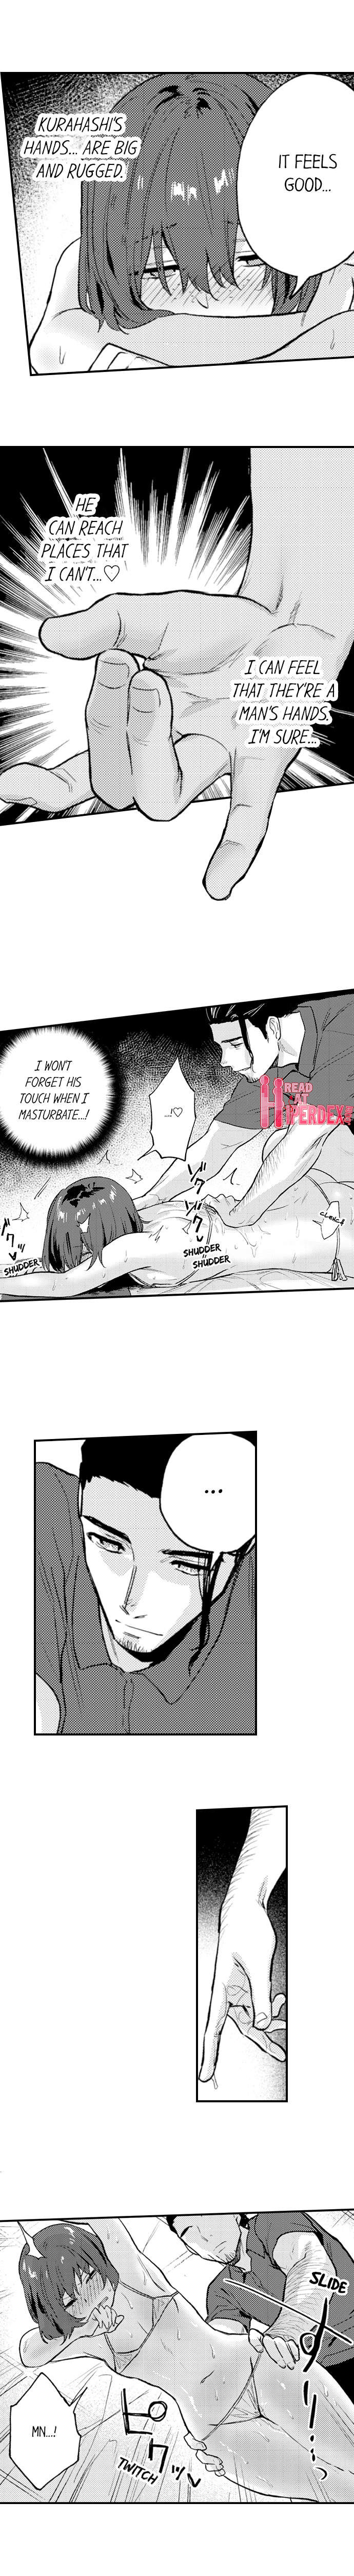 The Massage ♂♀ The Pleasure of Full Course Sex - Chapter 1 Page 4